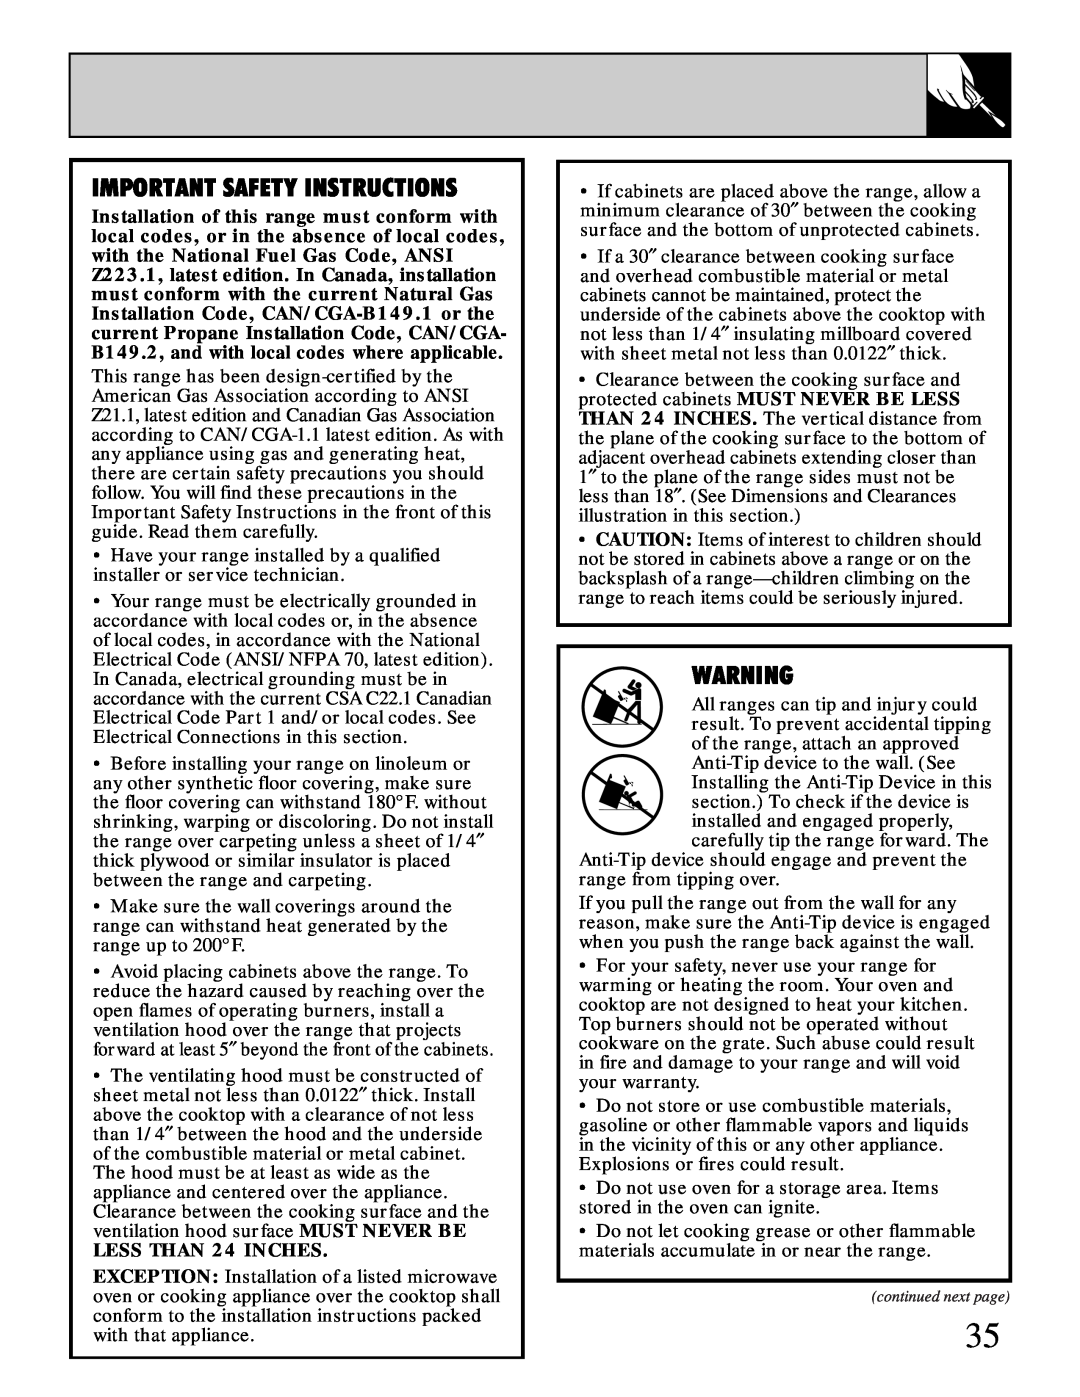 GE XL44 installation instructions Important Safety Instructions, LESS THAN 24 INCHES 